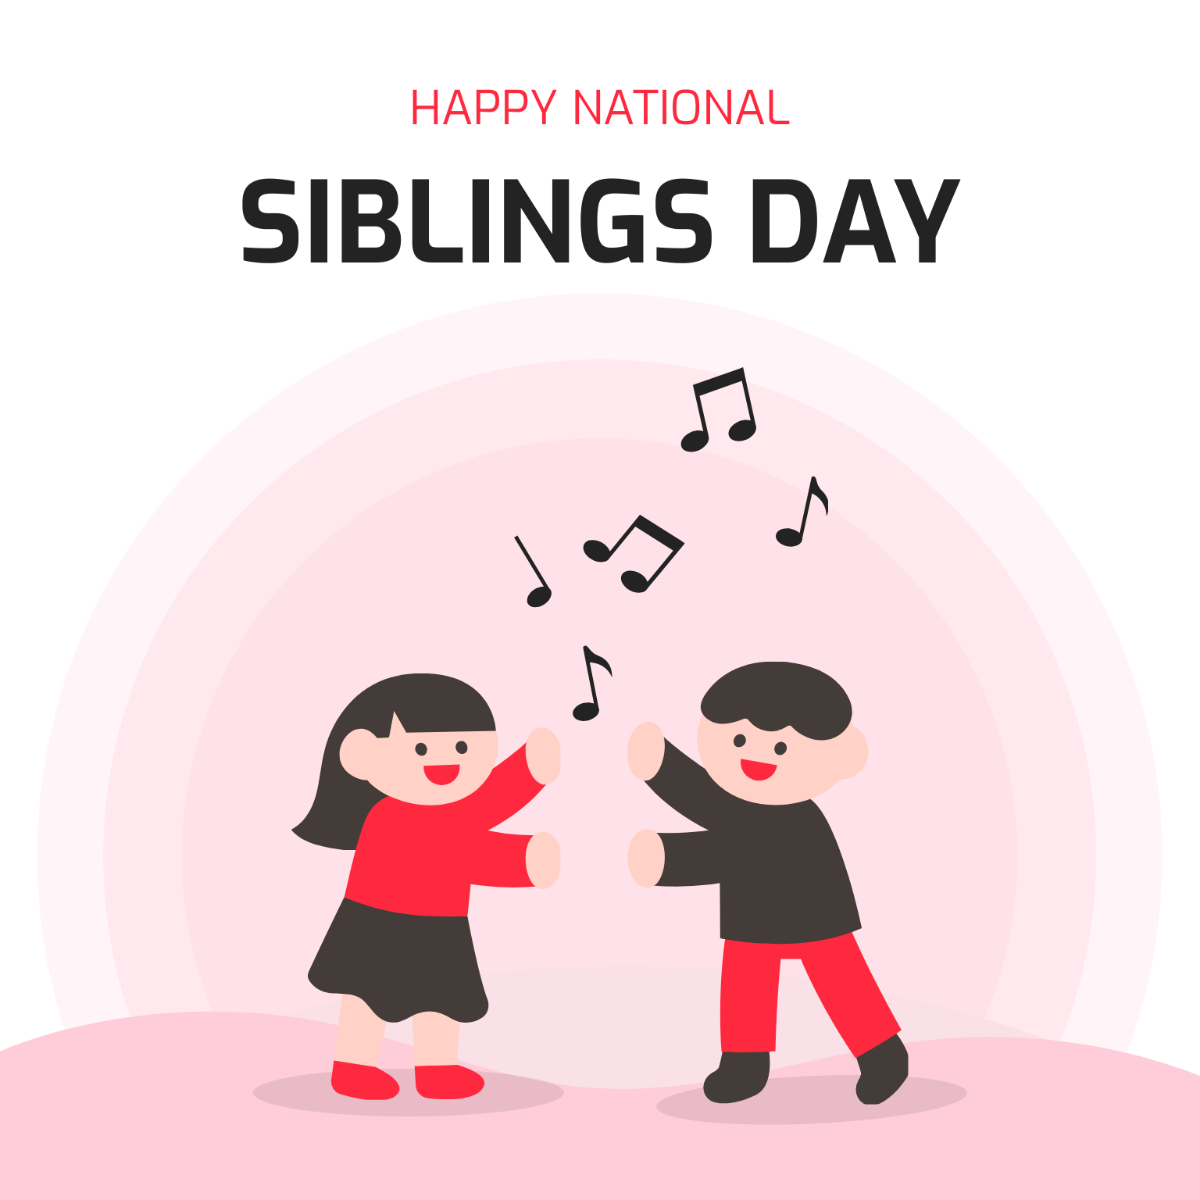 Happy National Siblings Day Illustration Template